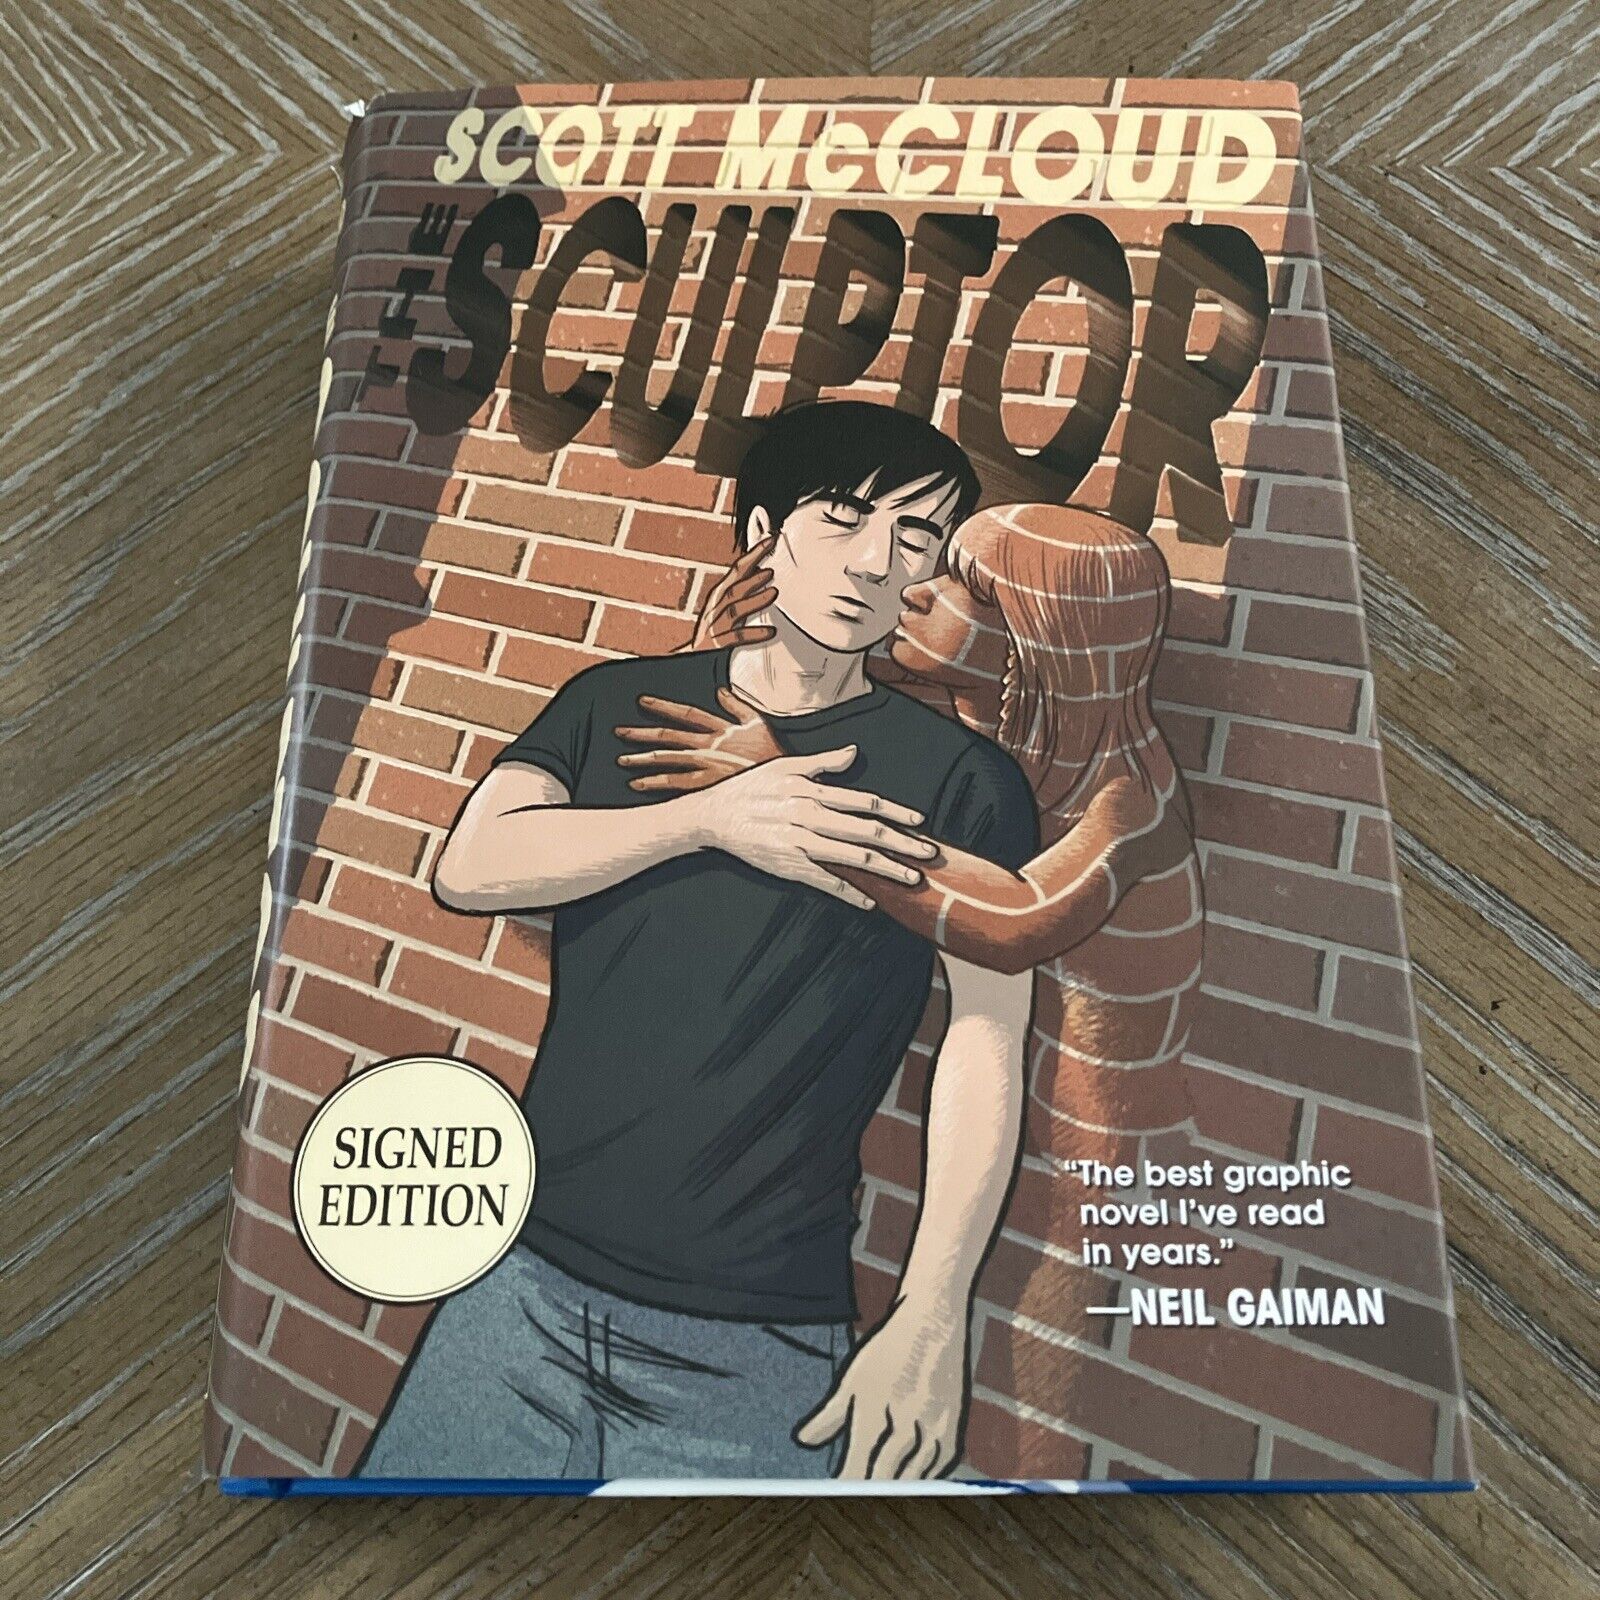 The Sculptor by Scott McCloud SIGNED EDITION First Second 2015 1st Edition, HC